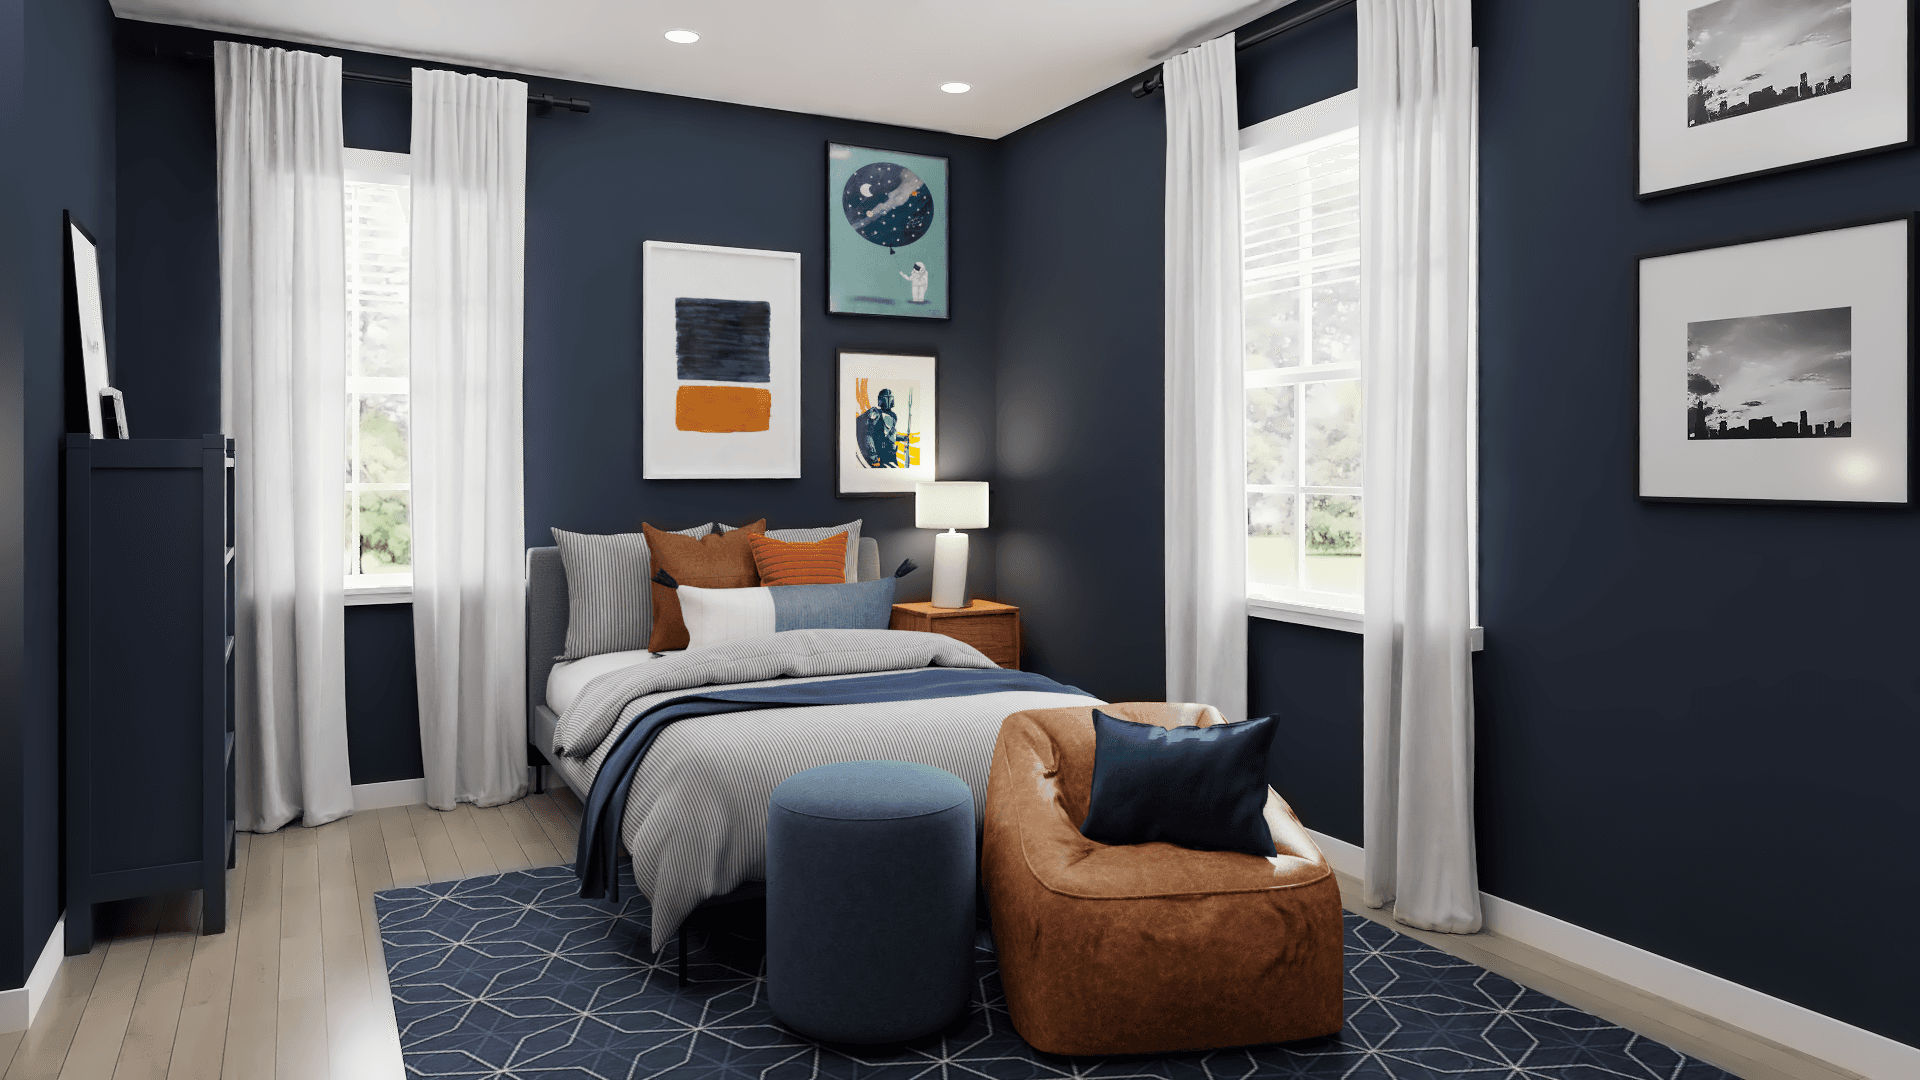 Transitional Kids’ Bedroom With Bold Colors